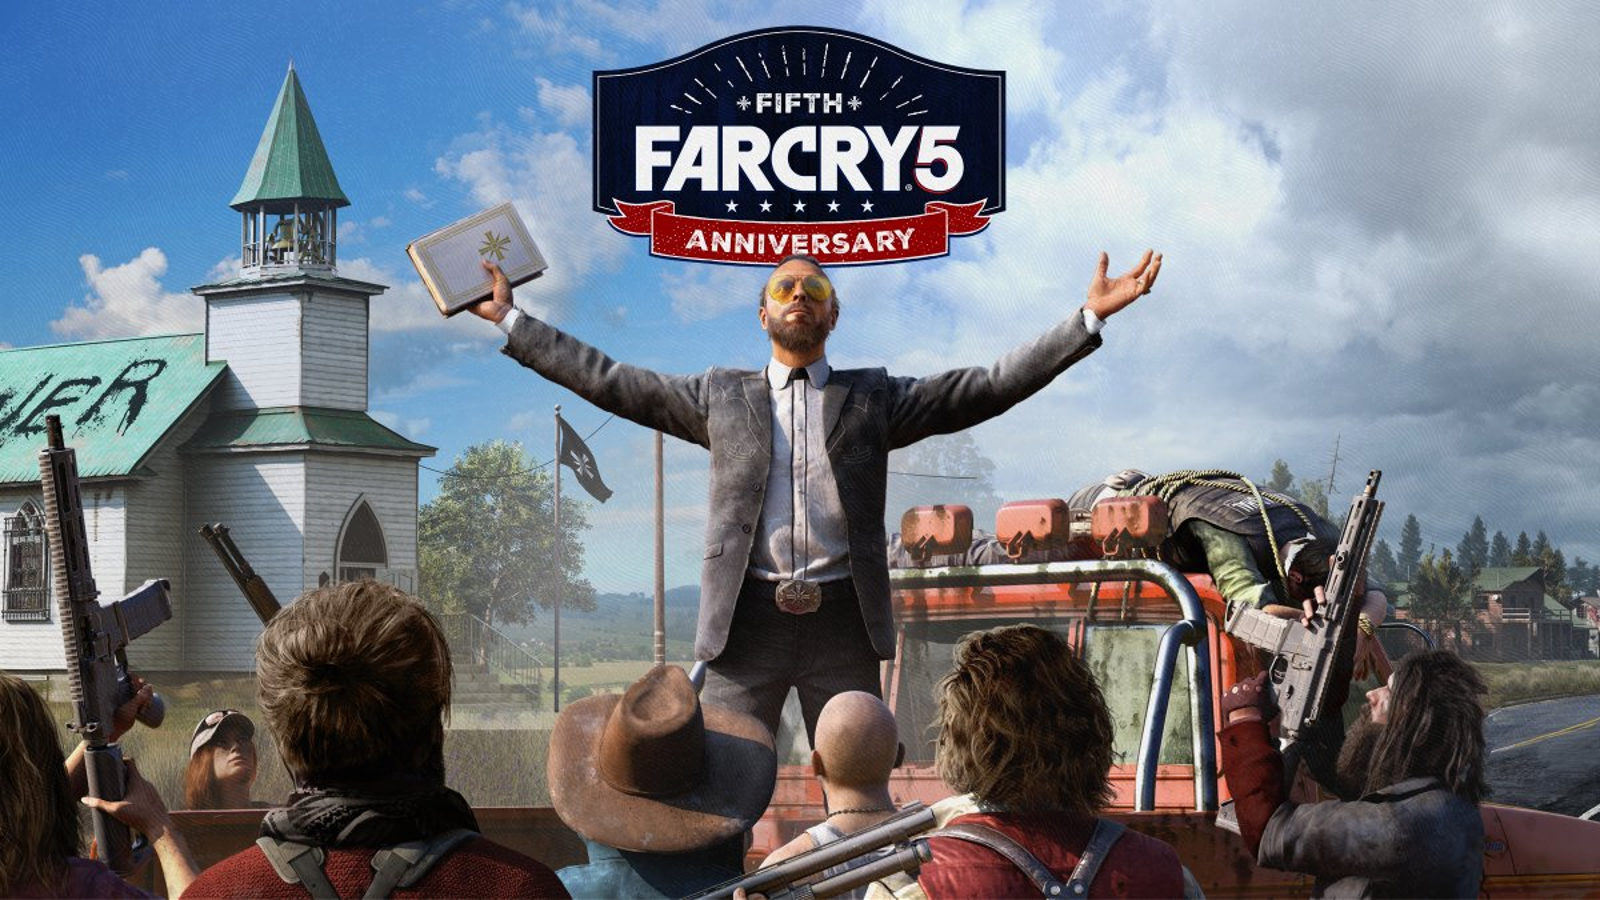 Far Cry 5 launches on Xbox One and PC